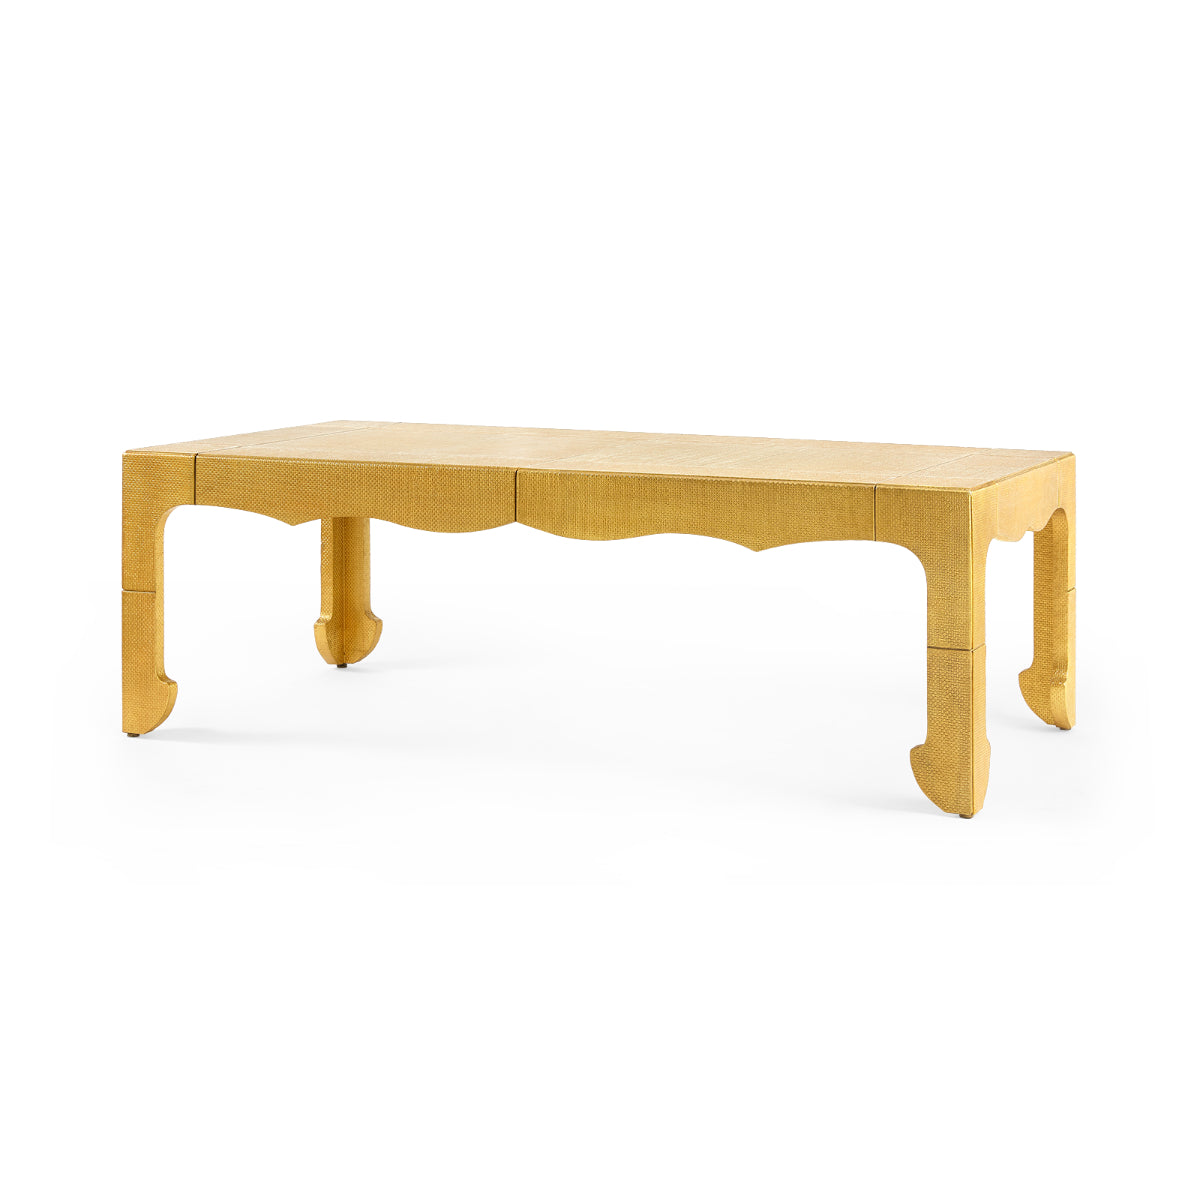 Jaques Coffee Table, Antique Brass Table Bungalow 5     Four Hands, Burke Decor, Mid Century Modern Furniture, Old Bones Furniture Company, Old Bones Co, Modern Mid Century, Designer Furniture, https://www.oldbonesco.com/